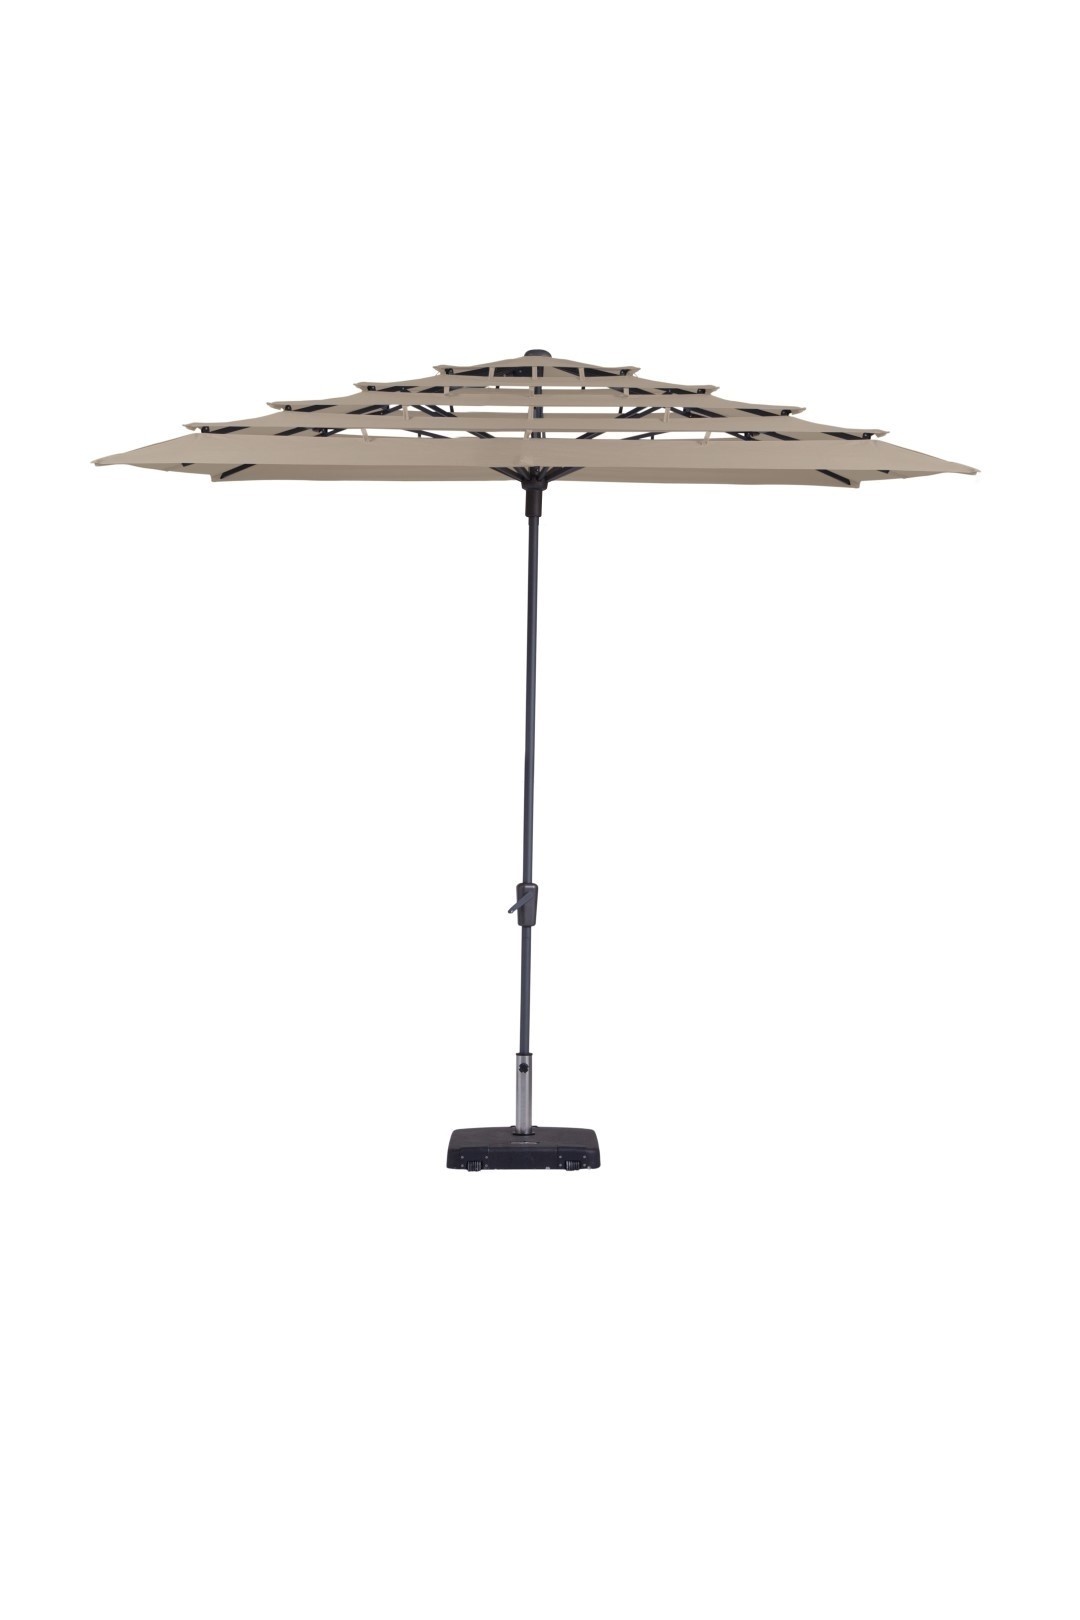 https://www.warentuin.nl/media/catalog/product/S/C/SCAN8713229624705_madison_parasol_syros_open_air_280x280_cm_polyester_grey_madi_5a4a.jpg